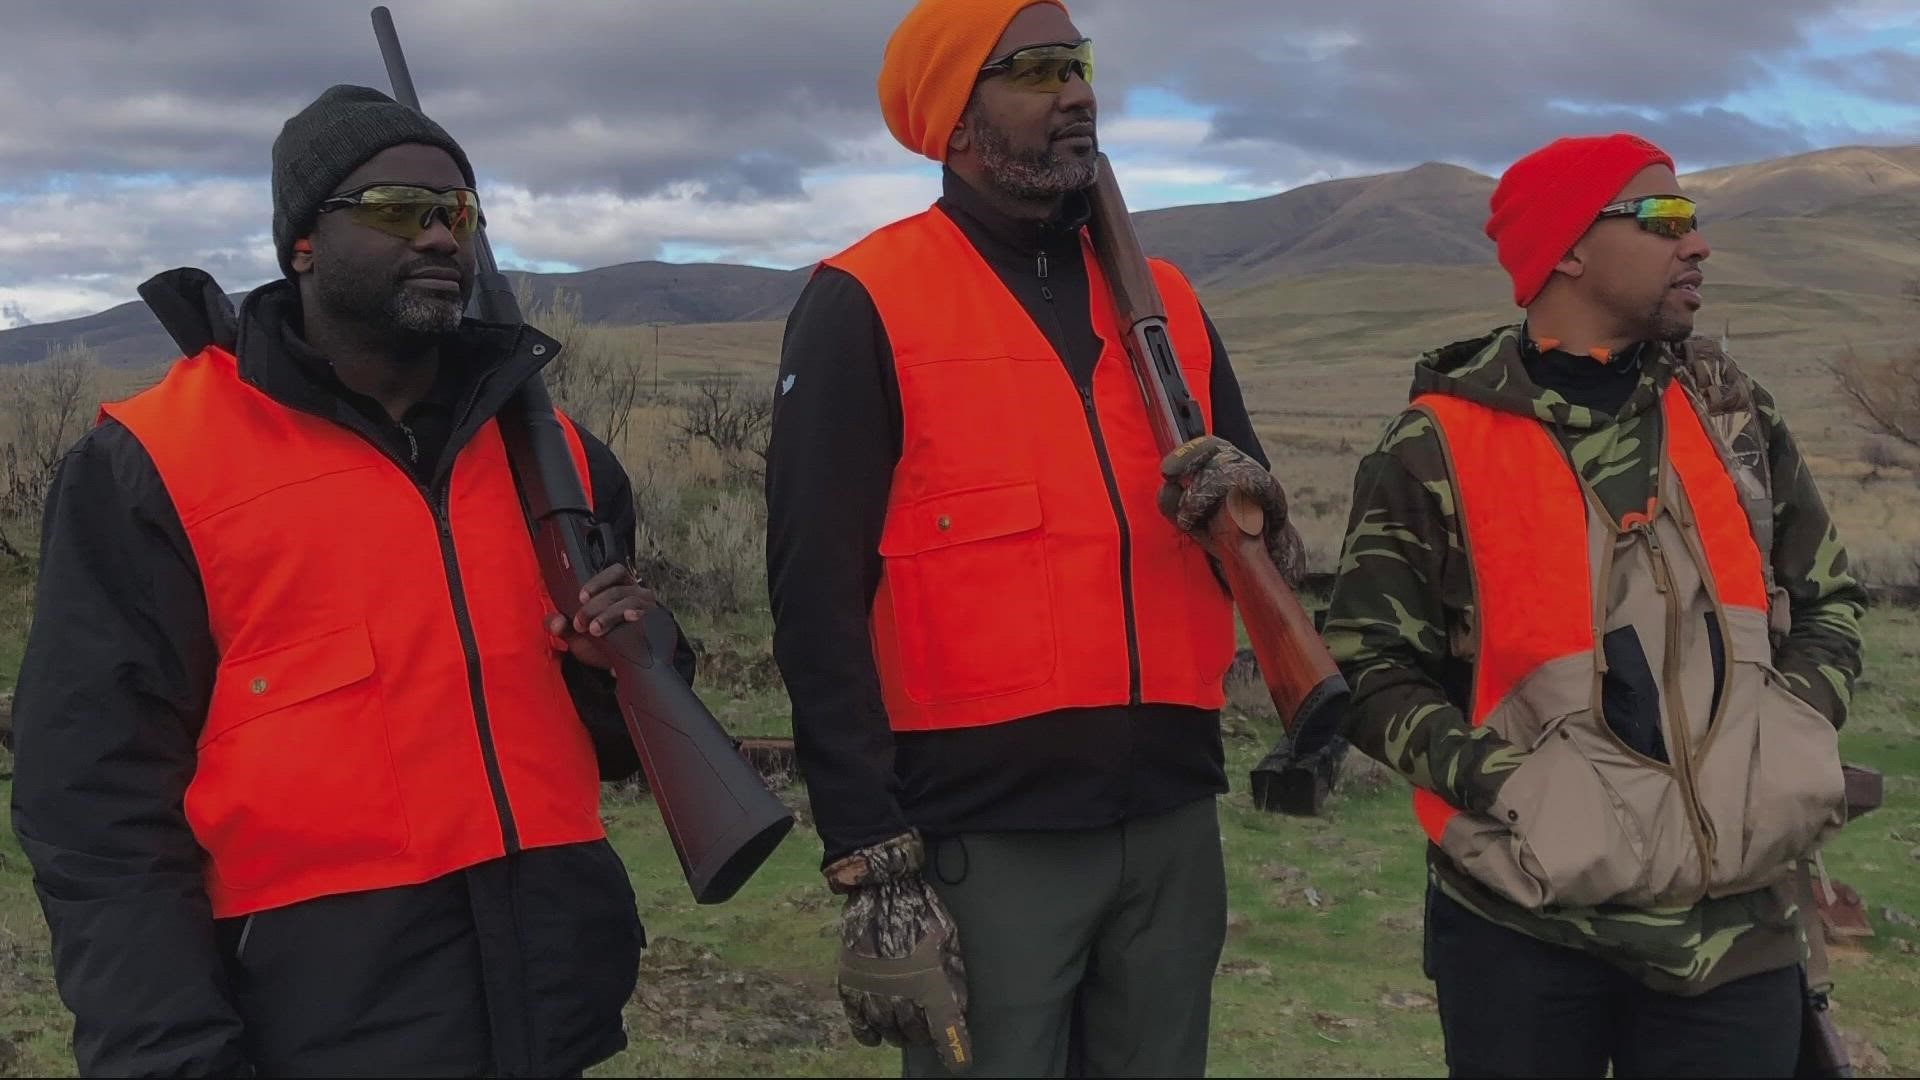 The Portland nonprofit teaches people how to get into hunting and other outdoor activities where people of color might traditionally feel unwelcome.